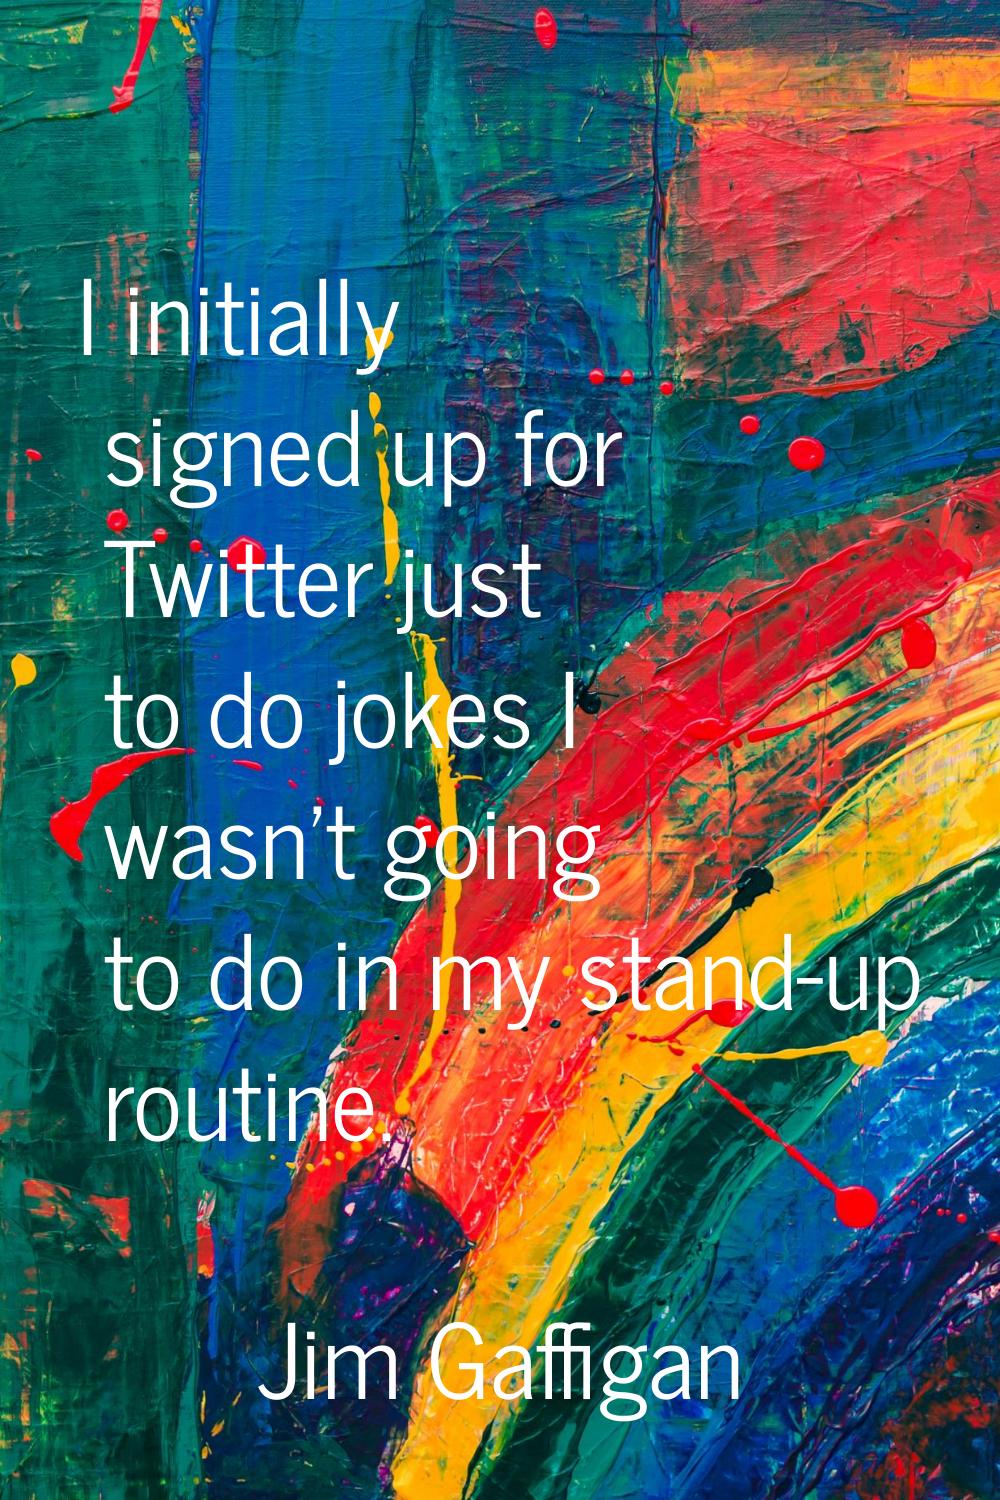 I initially signed up for Twitter just to do jokes I wasn't going to do in my stand-up routine.